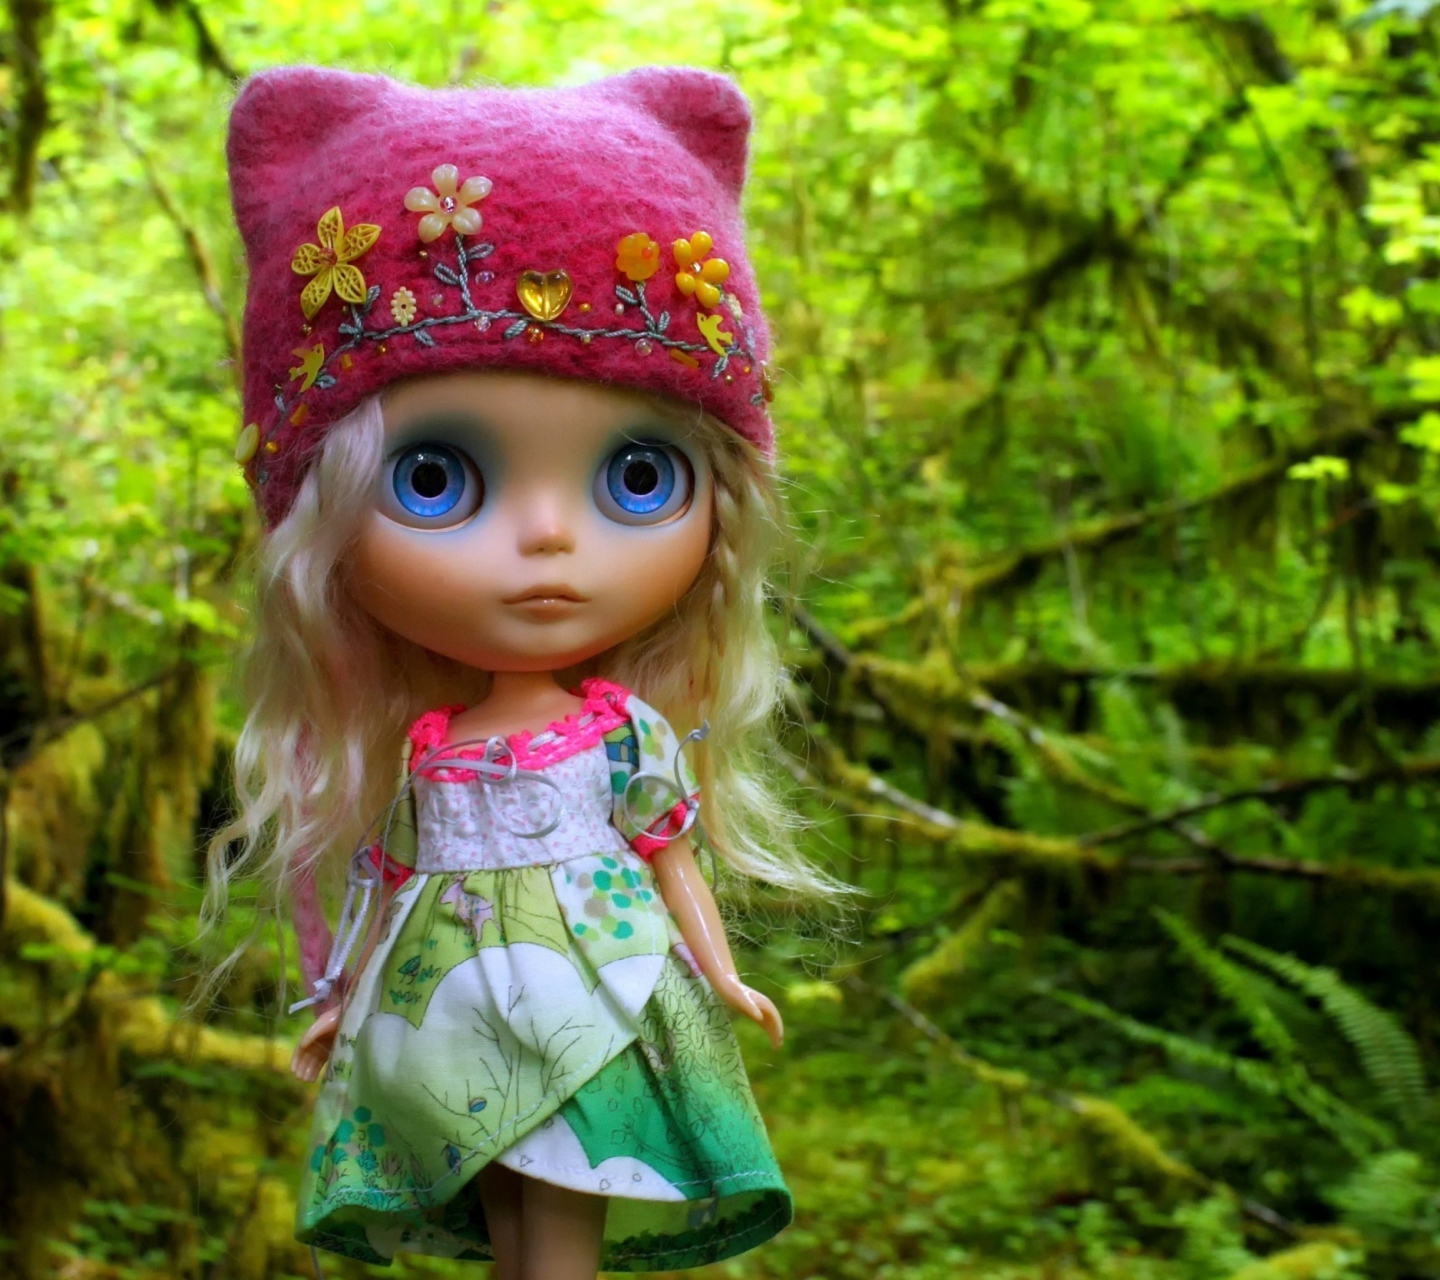 Cute Blonde Doll In Forest wallpaper 1440x1280